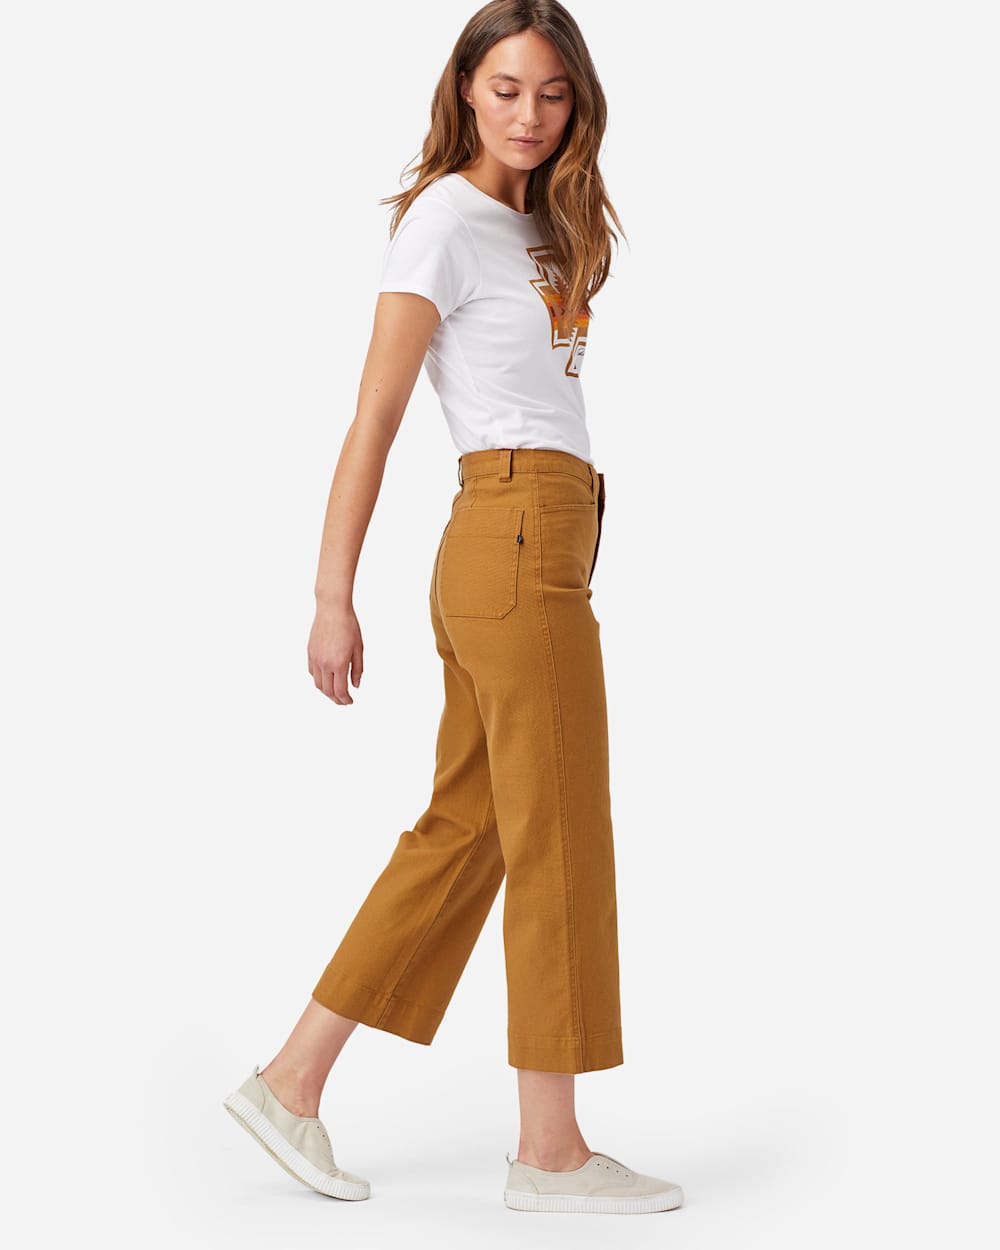 WOMEN'S HIGH-WAISTED CROPPED PANTS IN PEANUT image number 1